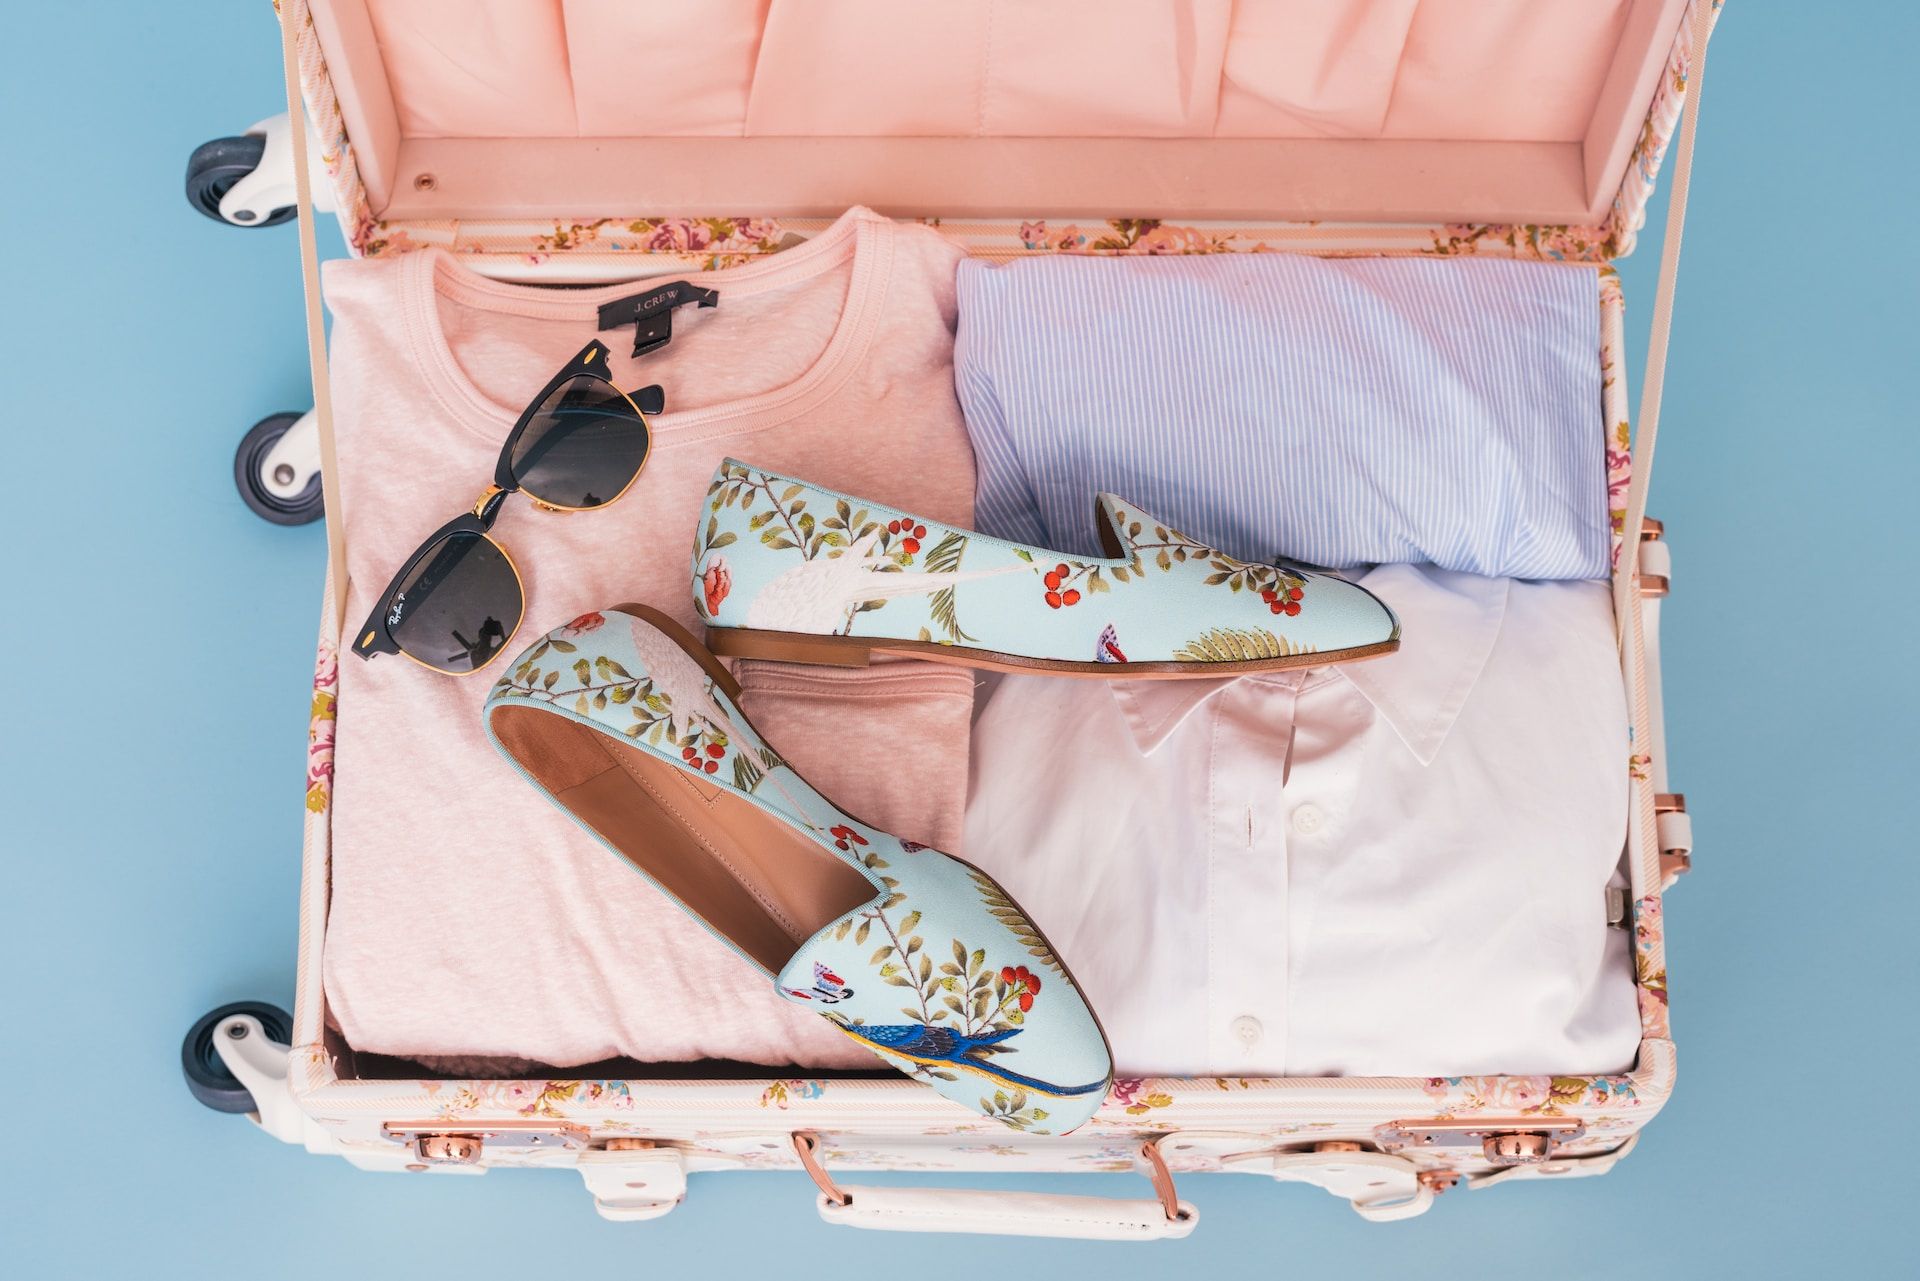 Shades, shoes and clothing in pink suitcase 